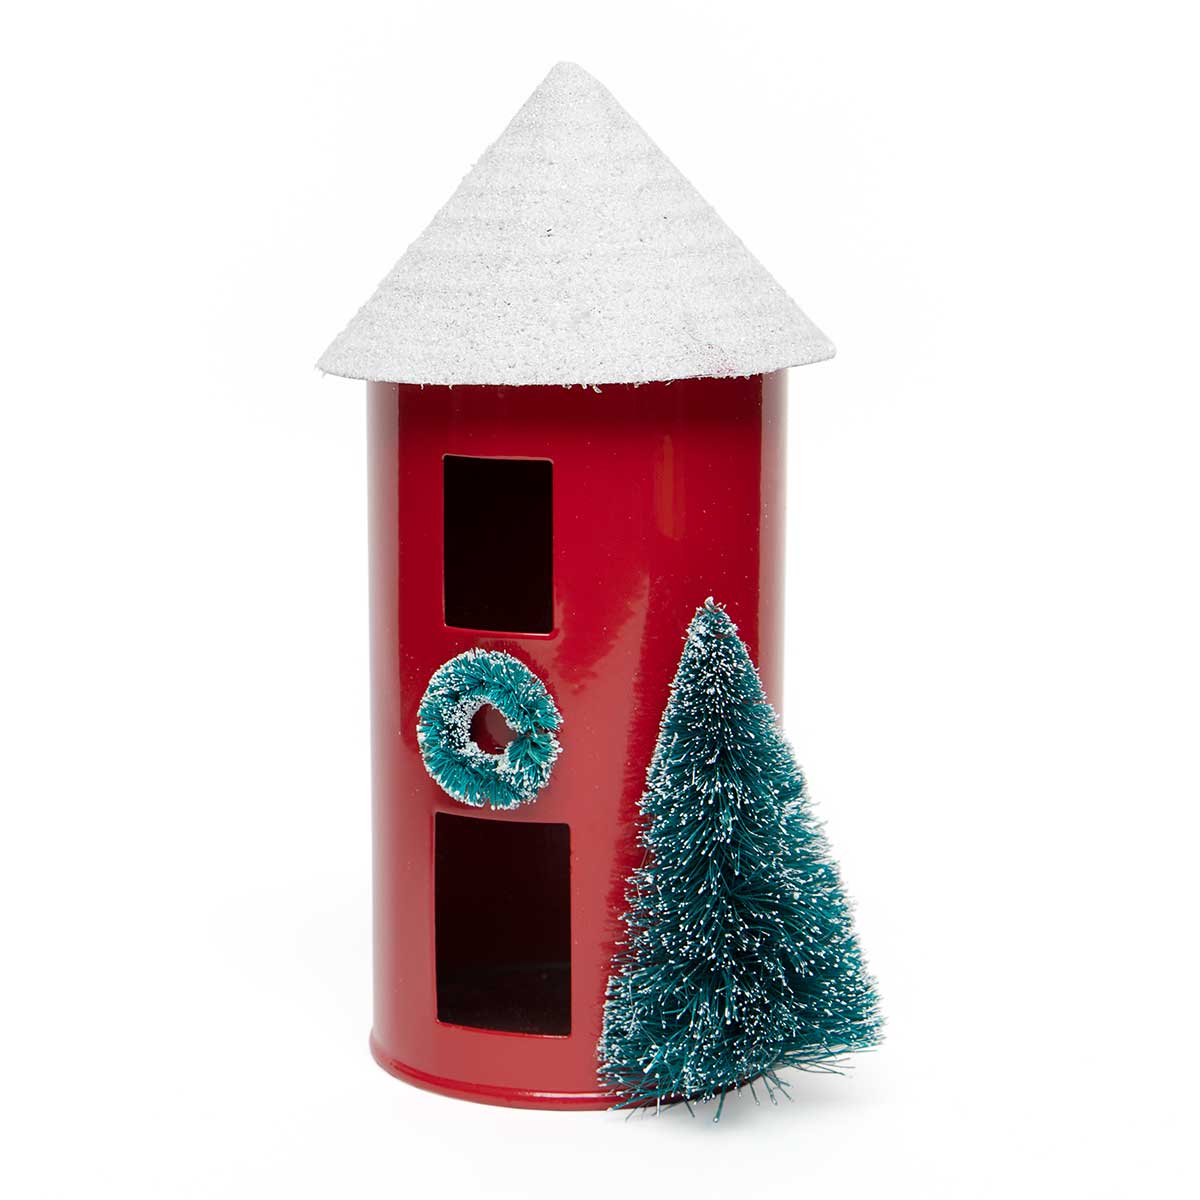 !METAL SILO RED WITH SNOW, GLITTER MICA, PINE WREATH AND